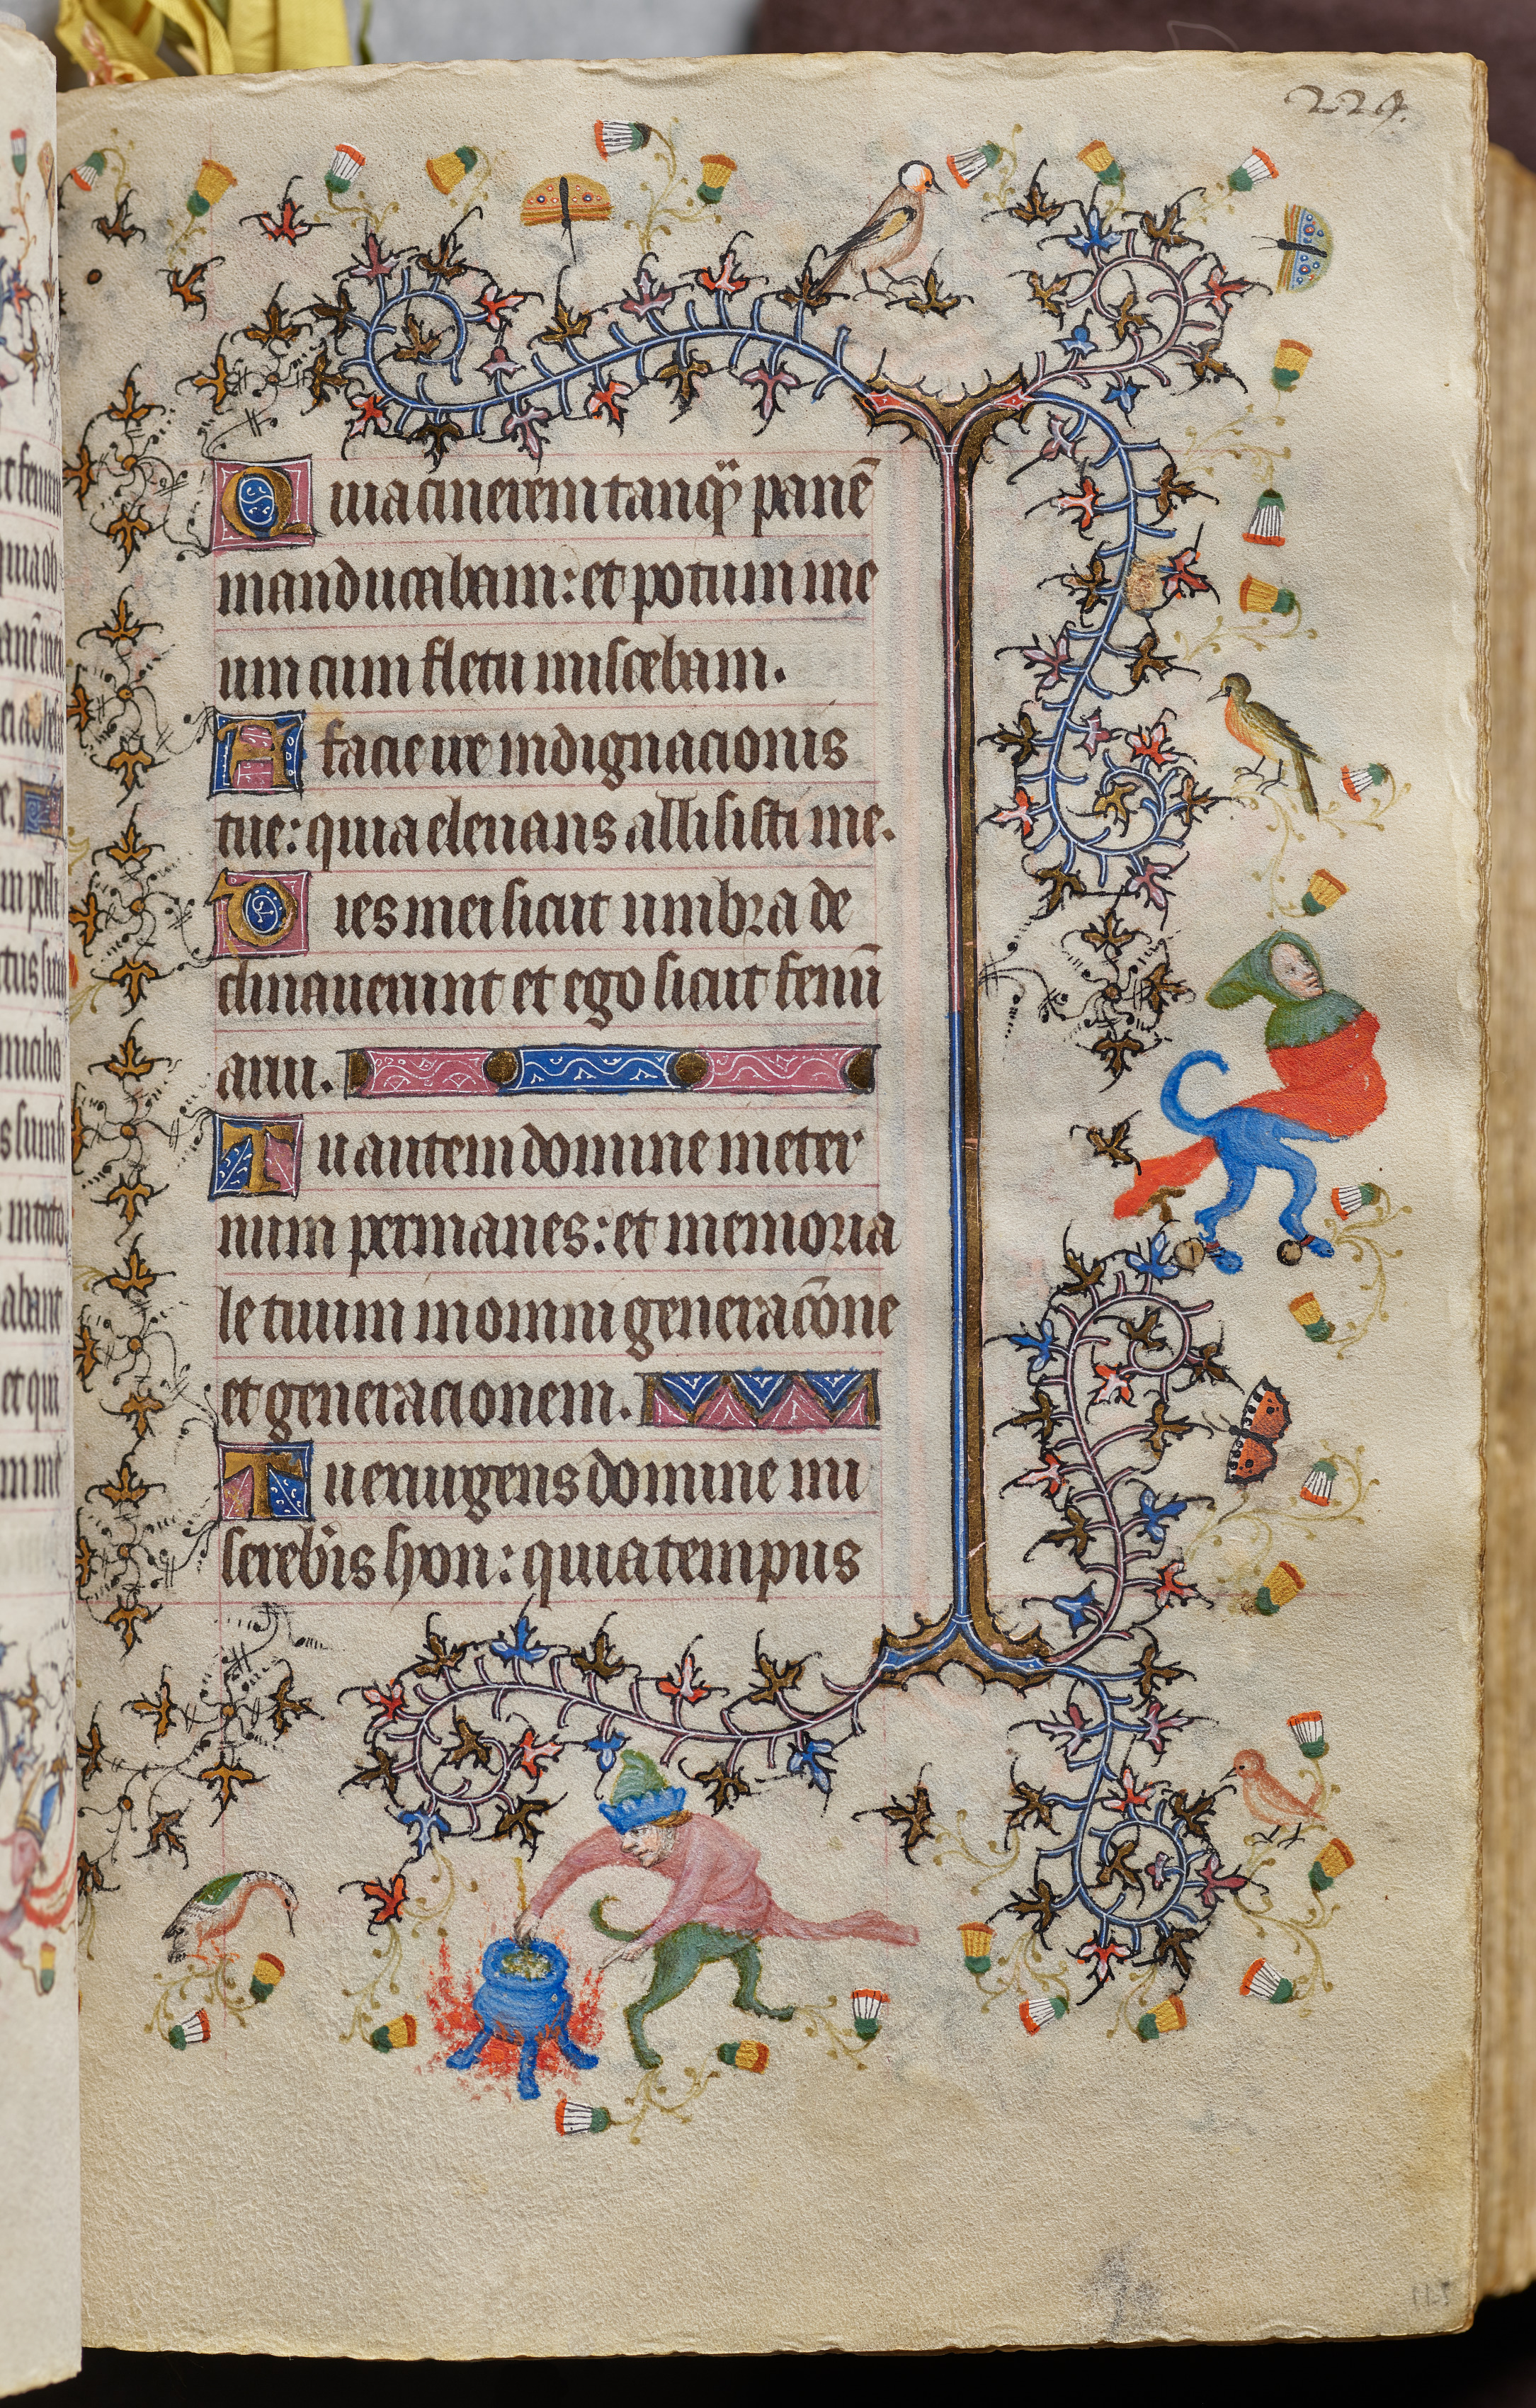 Hours of Charles the Noble, King of Navarre (1361-1425): fol. 115r, Text